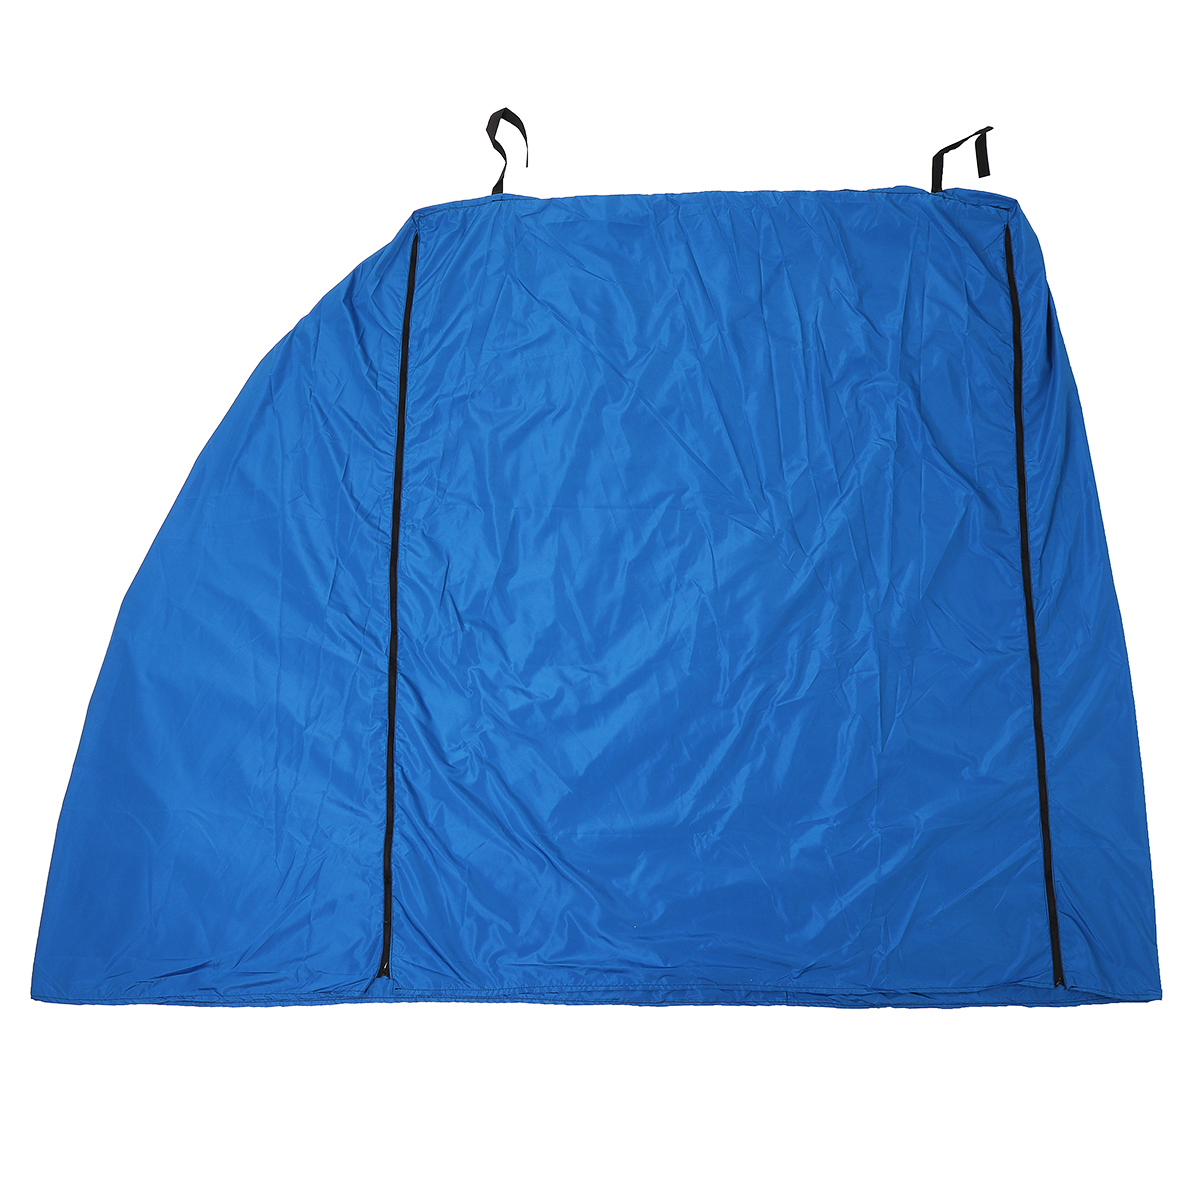 Polyester-Beach-Chair-Covers-Protector-Heavy-Duty-Waterproof-Outdoor-Garden-Use-1364772